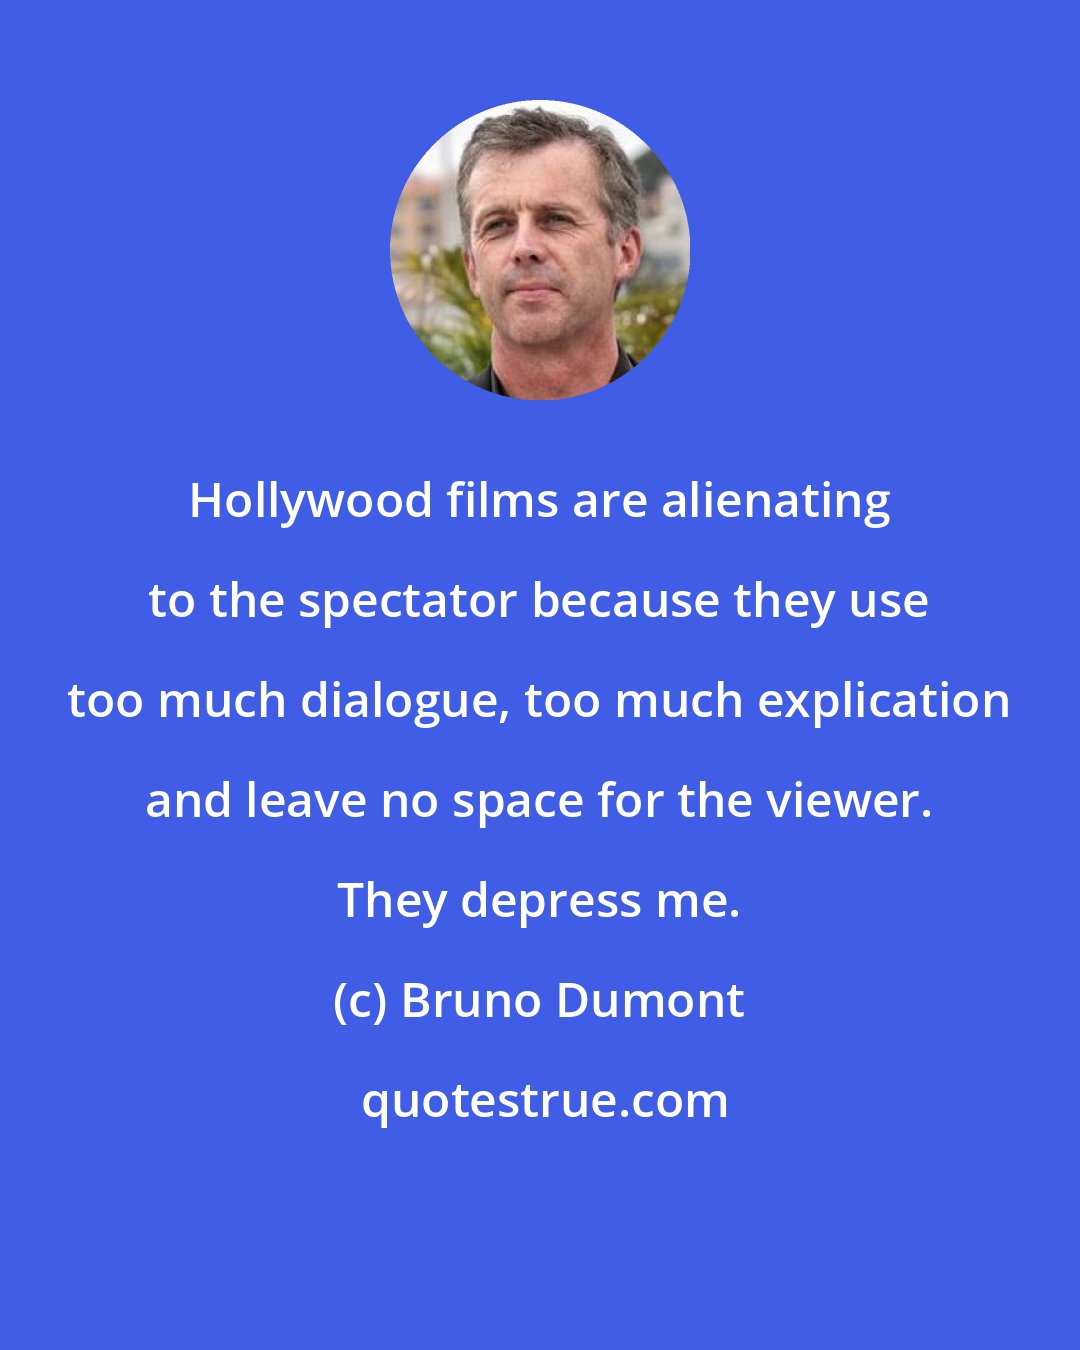 Bruno Dumont: Hollywood films are alienating to the spectator because they use too much dialogue, too much explication and leave no space for the viewer. They depress me.